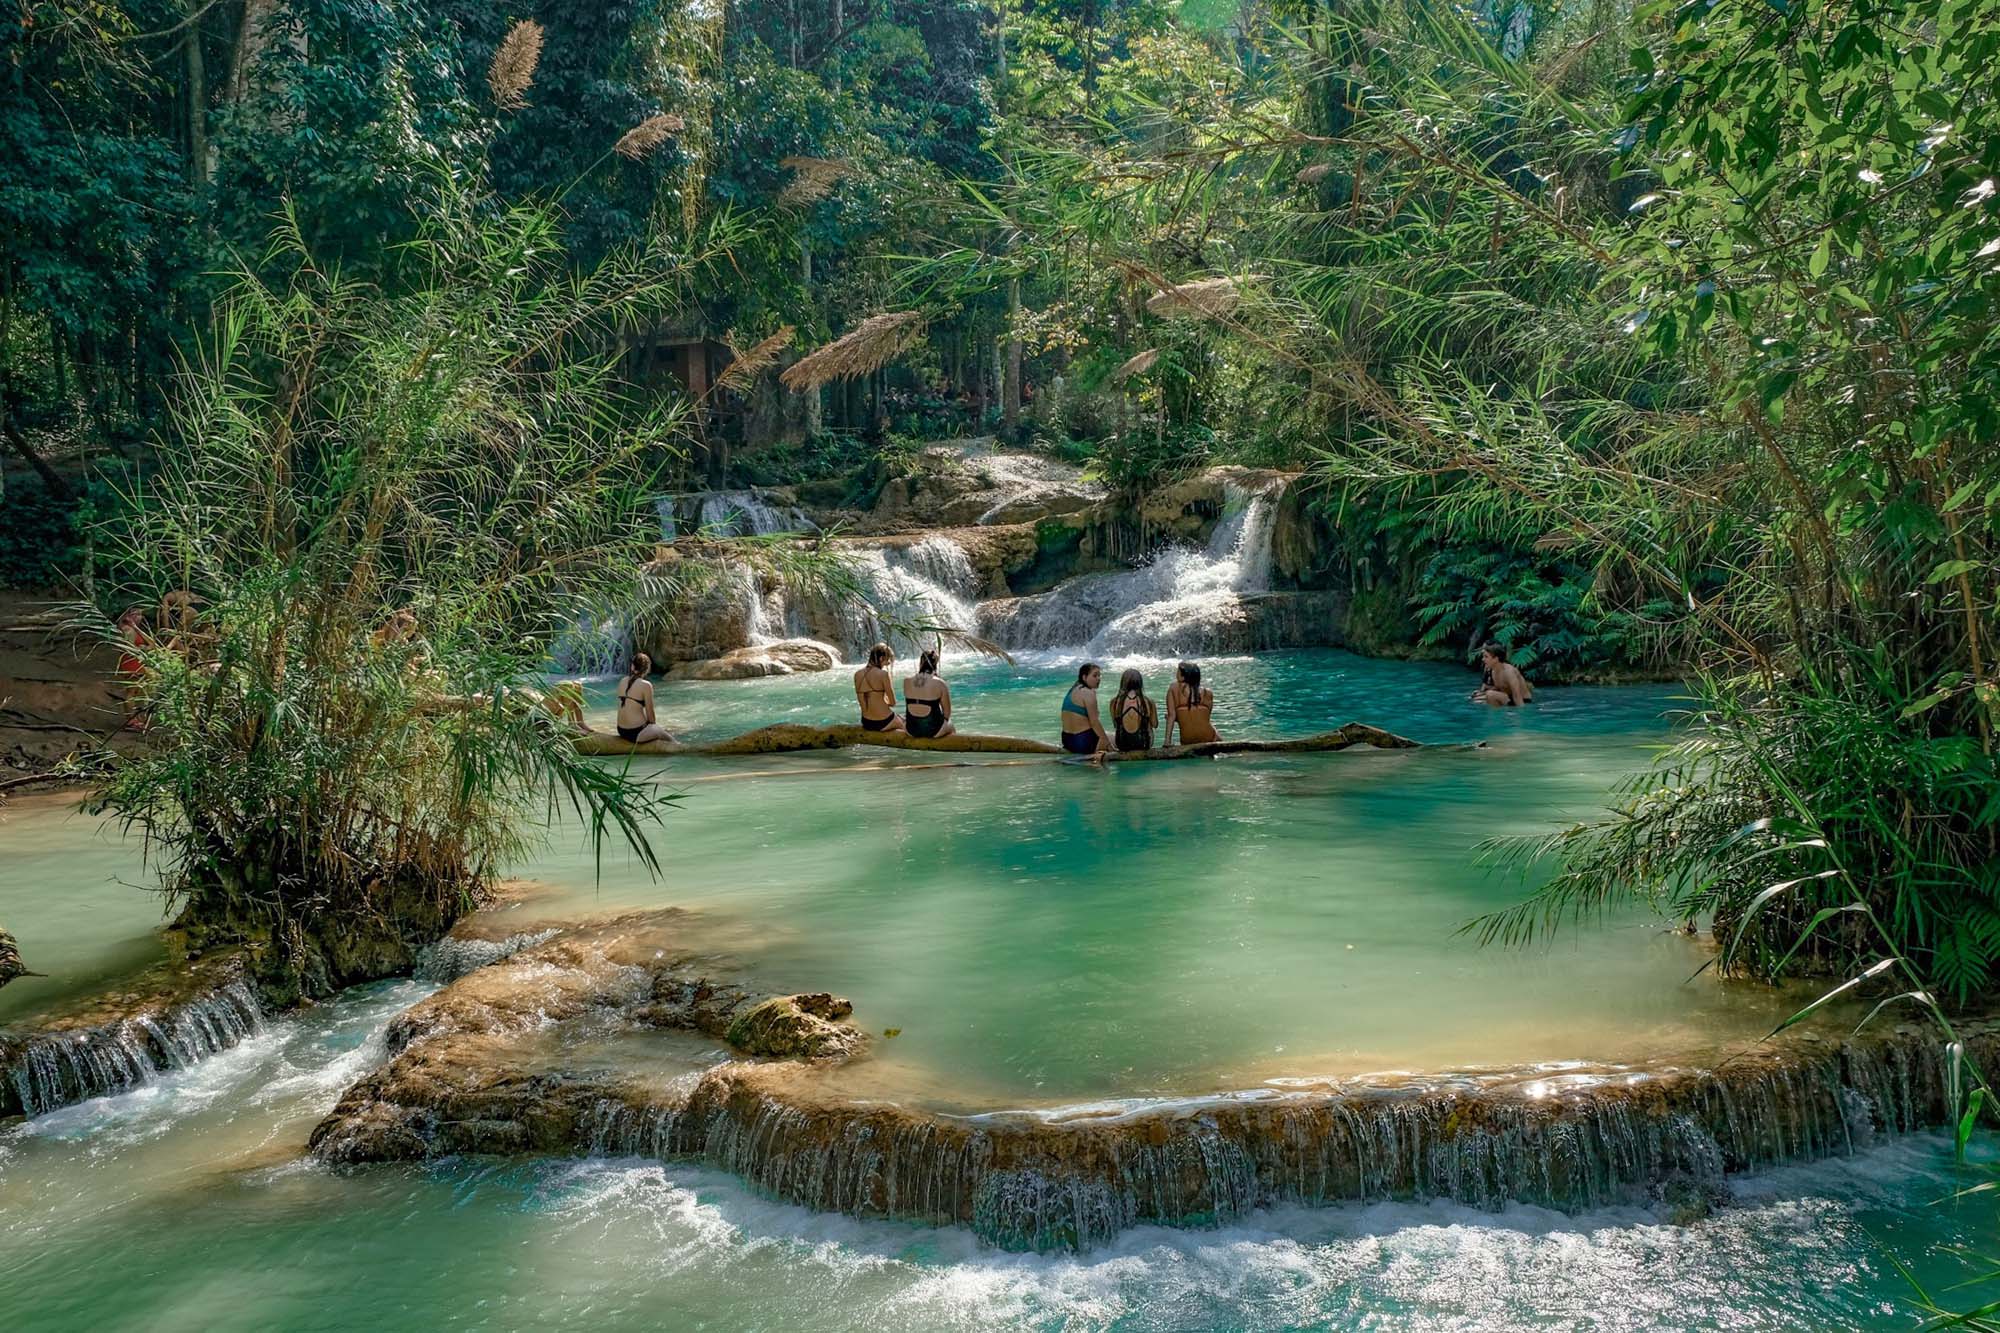 Viet Green Travel, Laos tours, the best Laos tours, The Trail of Luang Prabang 8 days, Private tours, Luxury tours